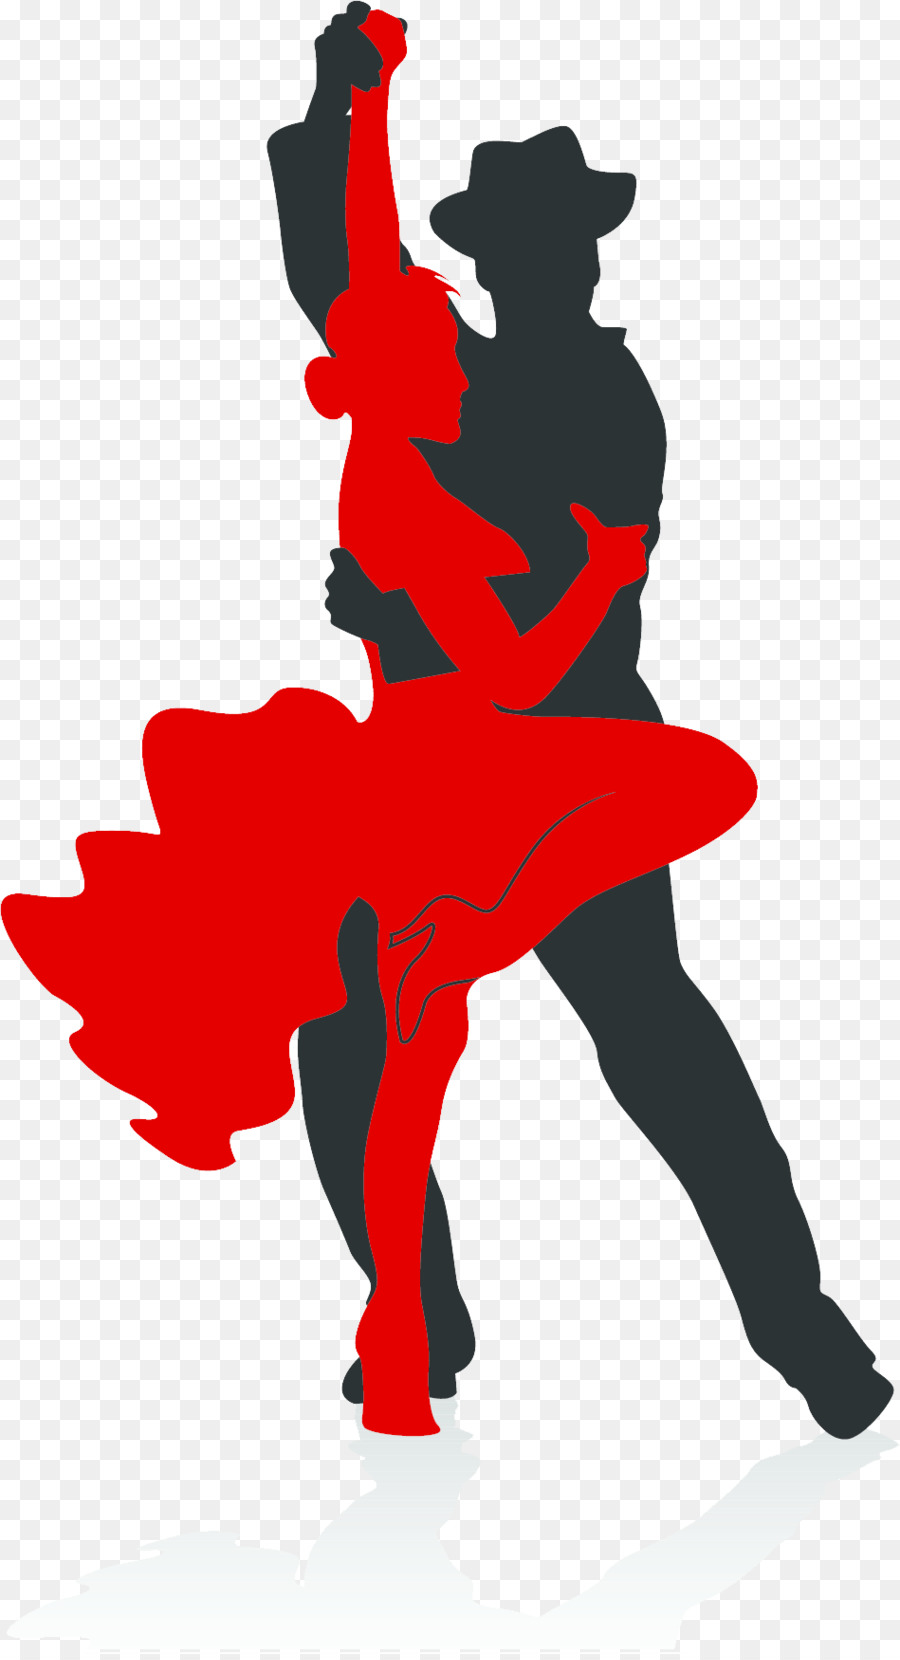 Dancer Silhouette Png Download 949 1745 Free Transparent